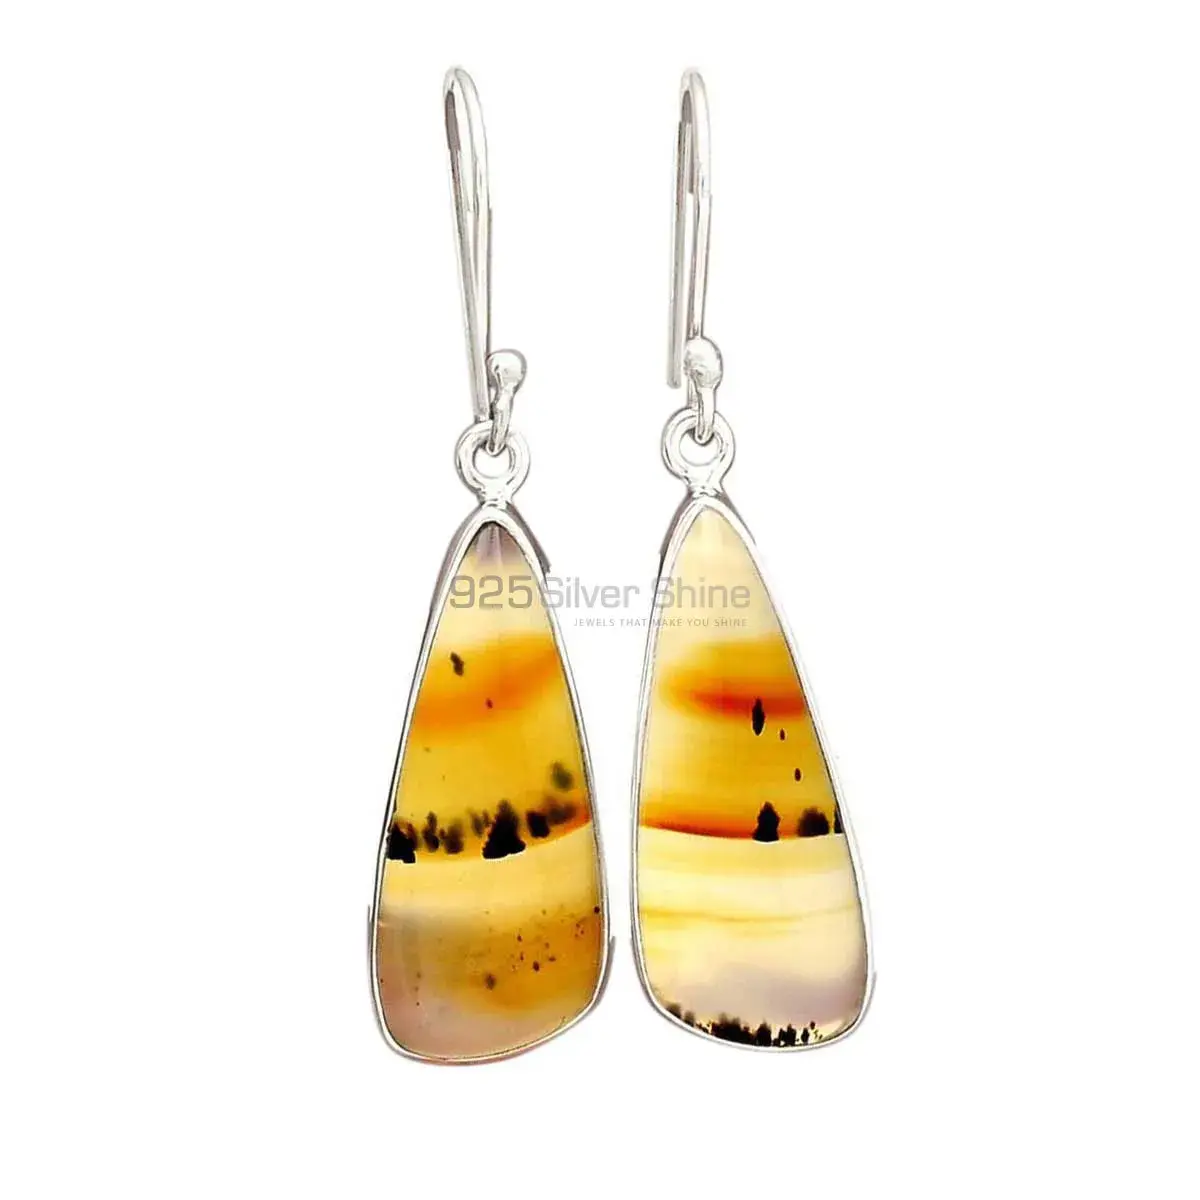 Inexpensive 925 Sterling Silver Handmade Earrings Manufacturer In Montana Agate Gemstone Jewelry 925SE2312_5